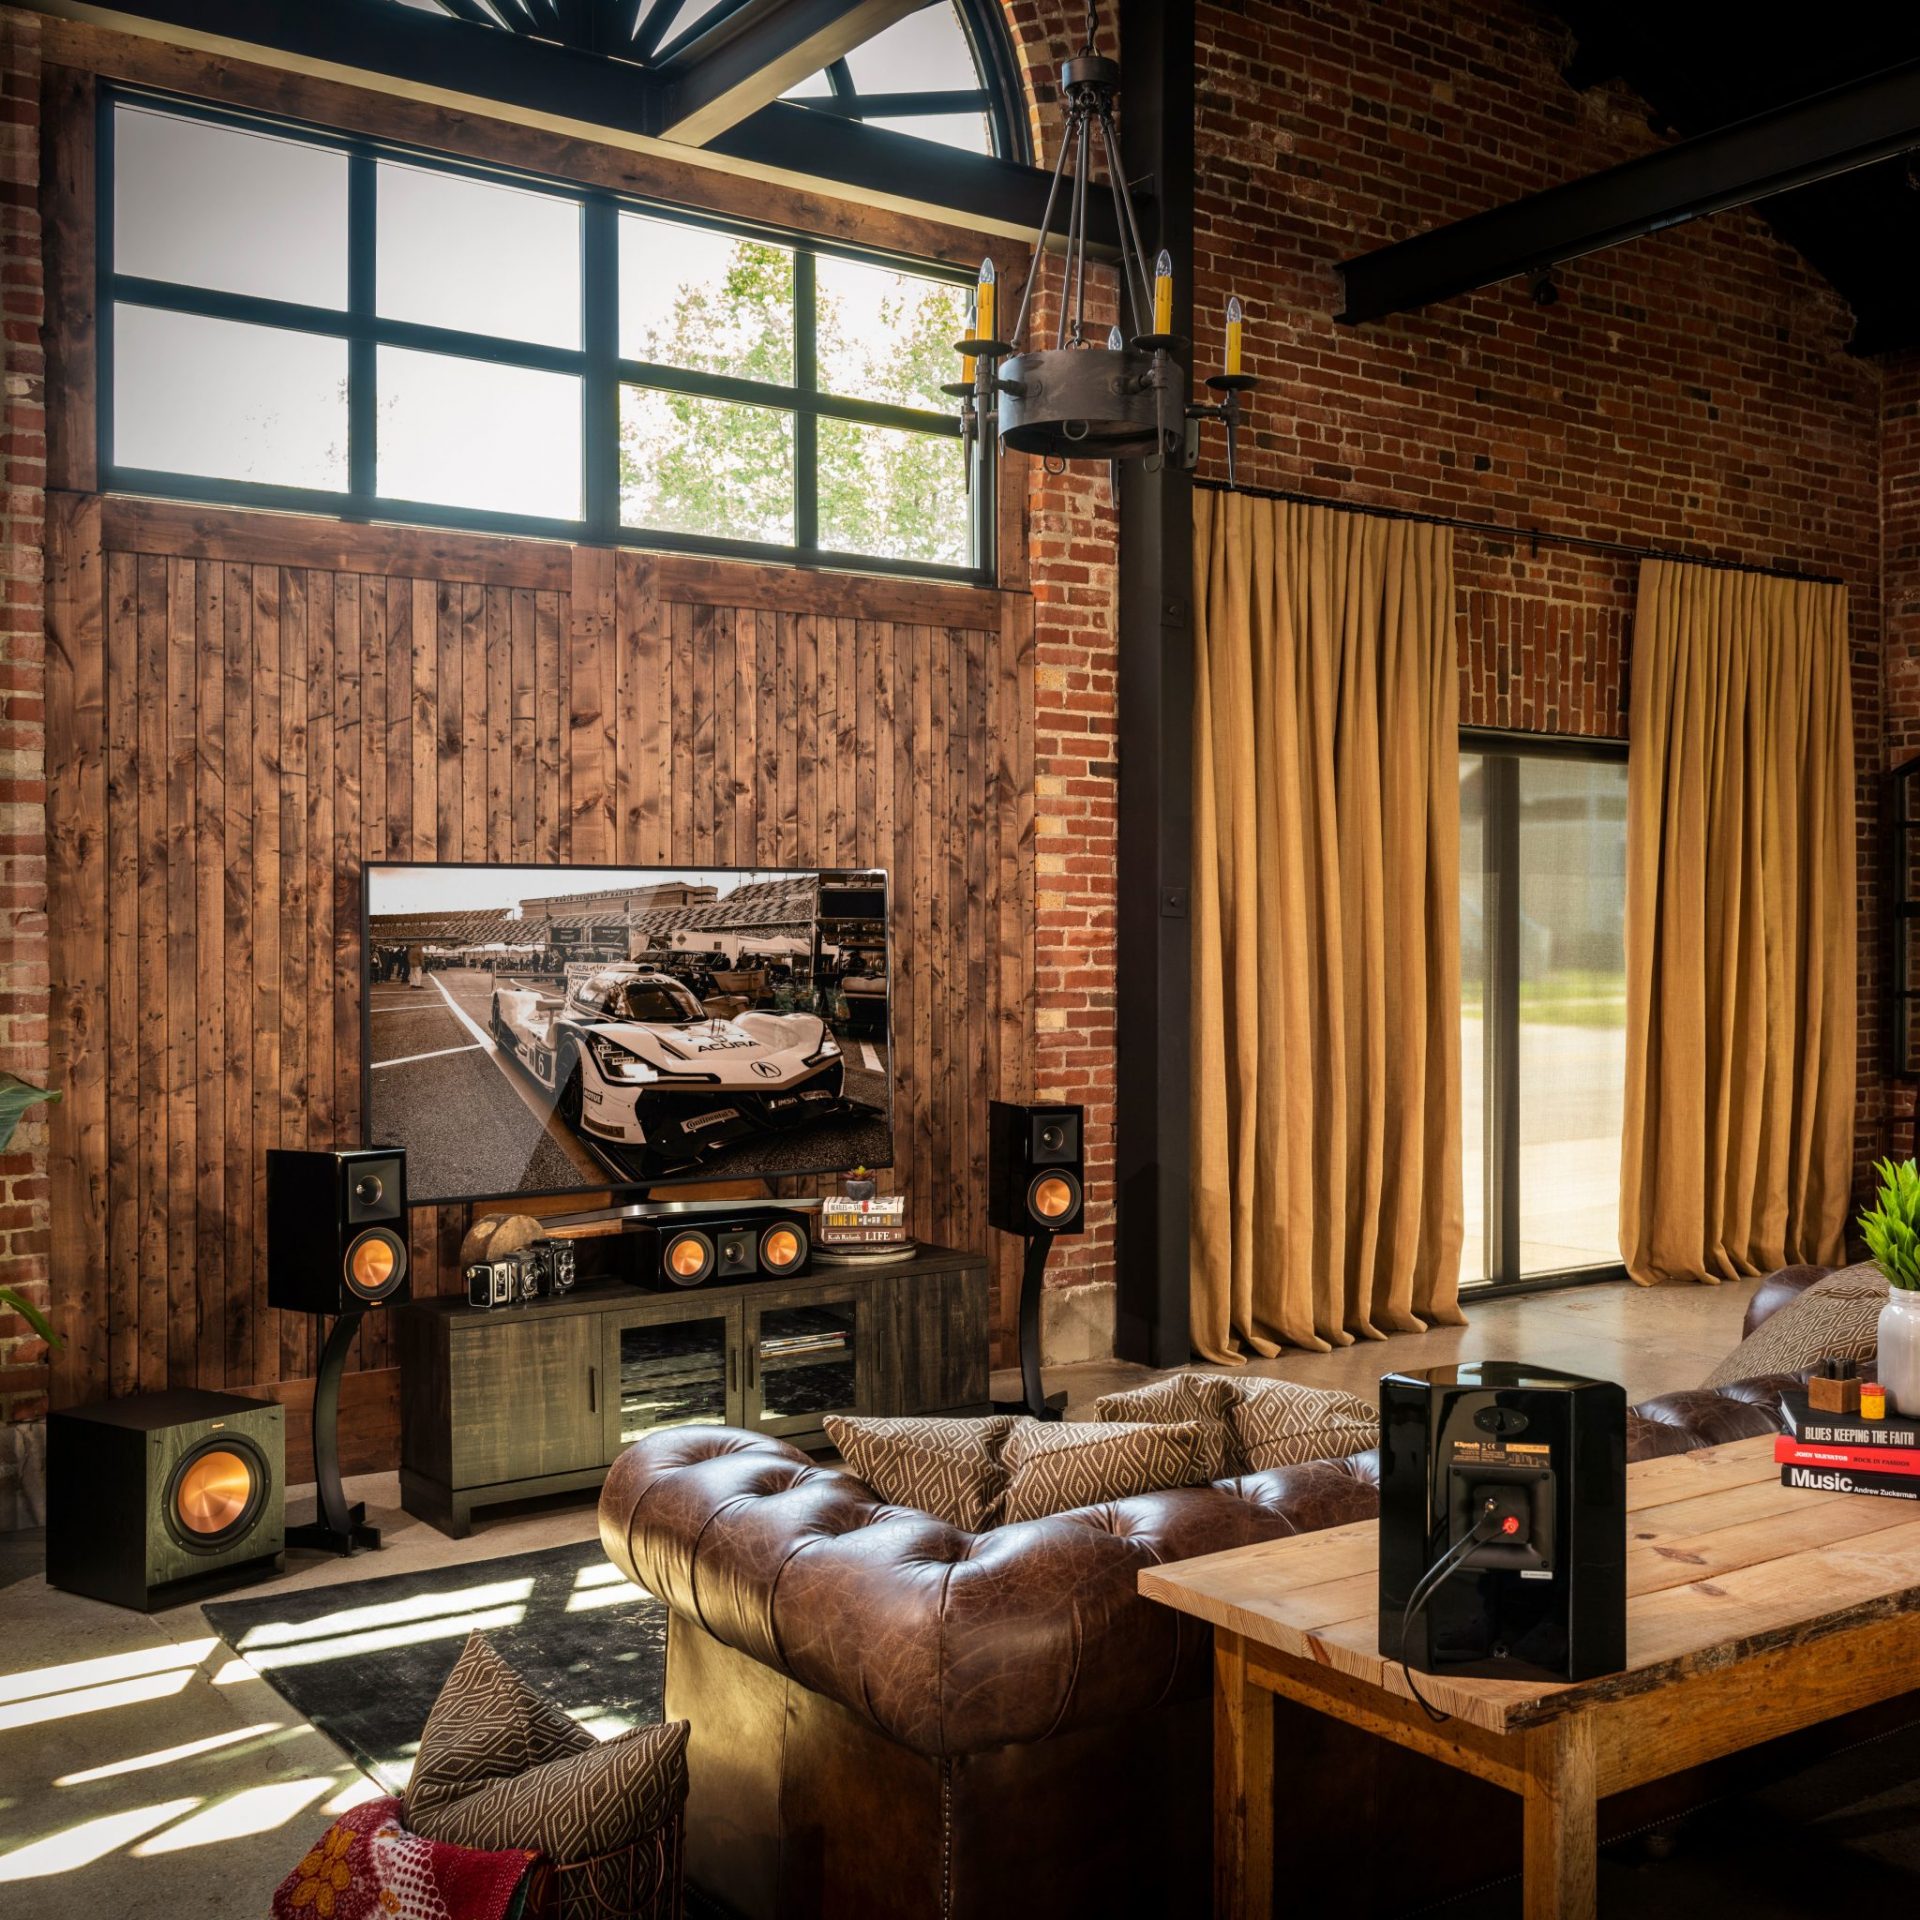 Klipsch's Reference Premiere home audio system in a home setting